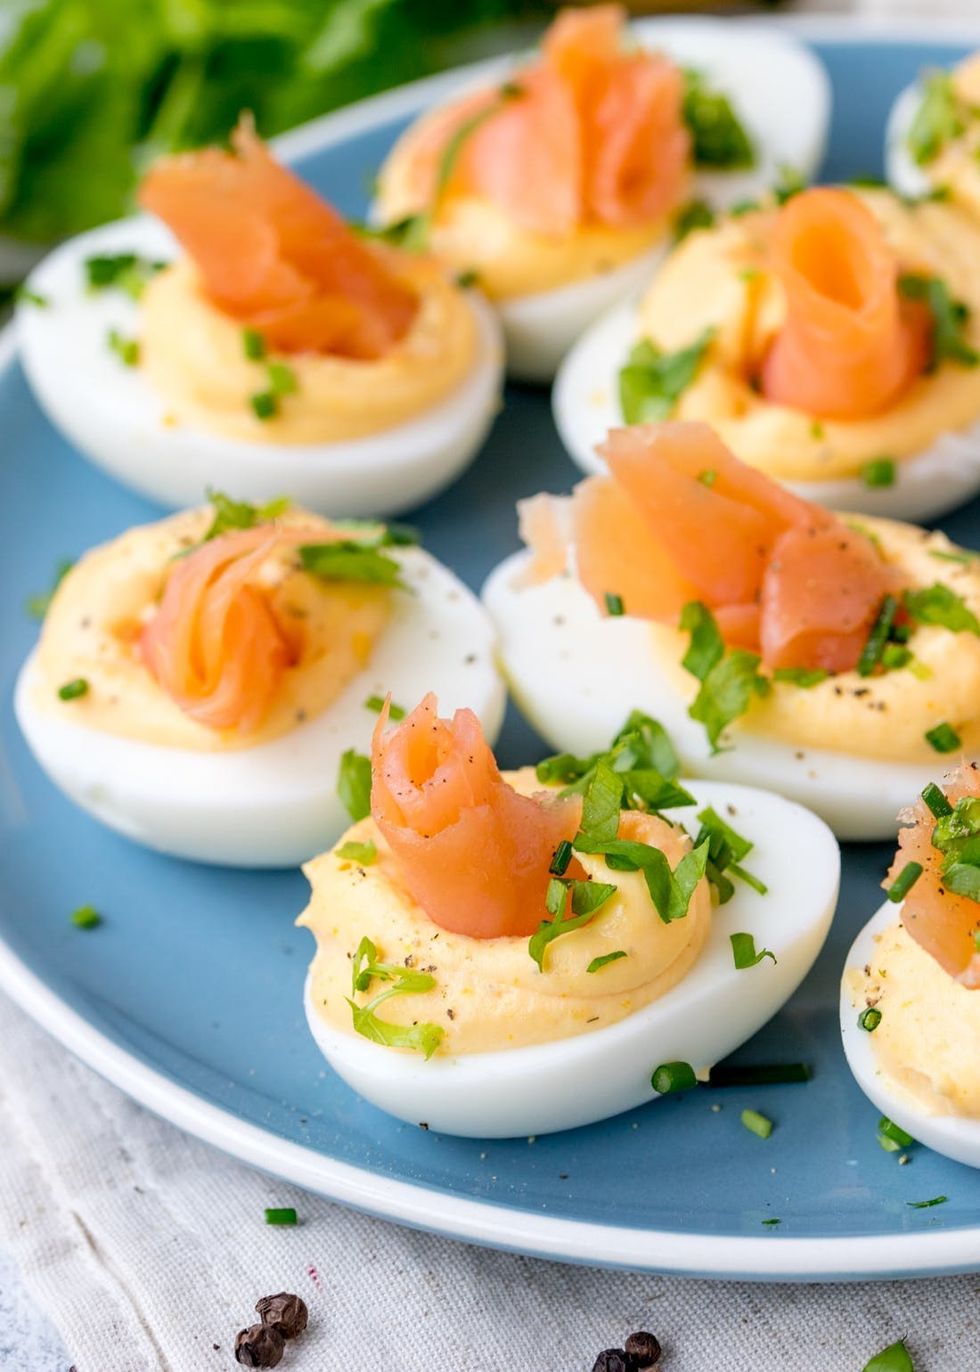 Posh-up Those Boiled Eggs With Our Smoked Salmon Devilled Eggs Recipe!